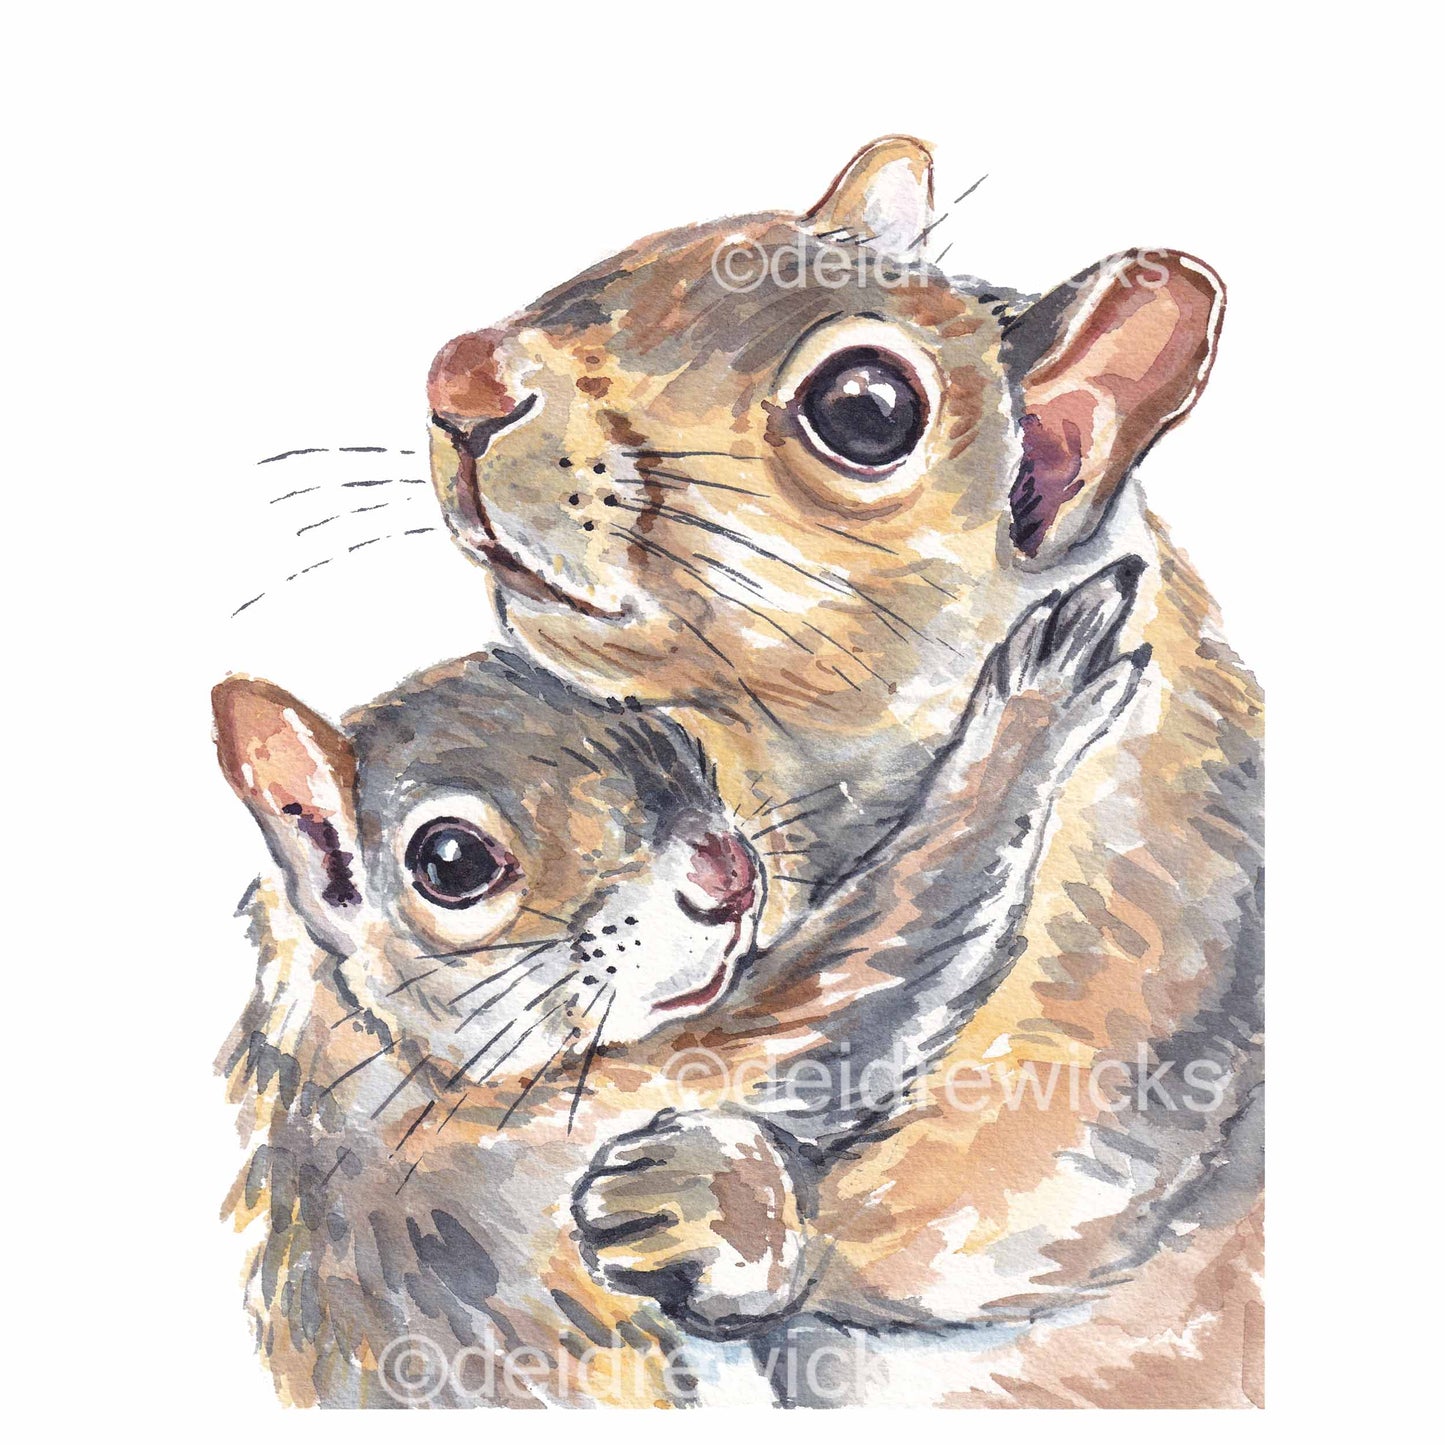 Watercolour painting of a Mother squirrel hugging her baby by artist Deidre Wicks